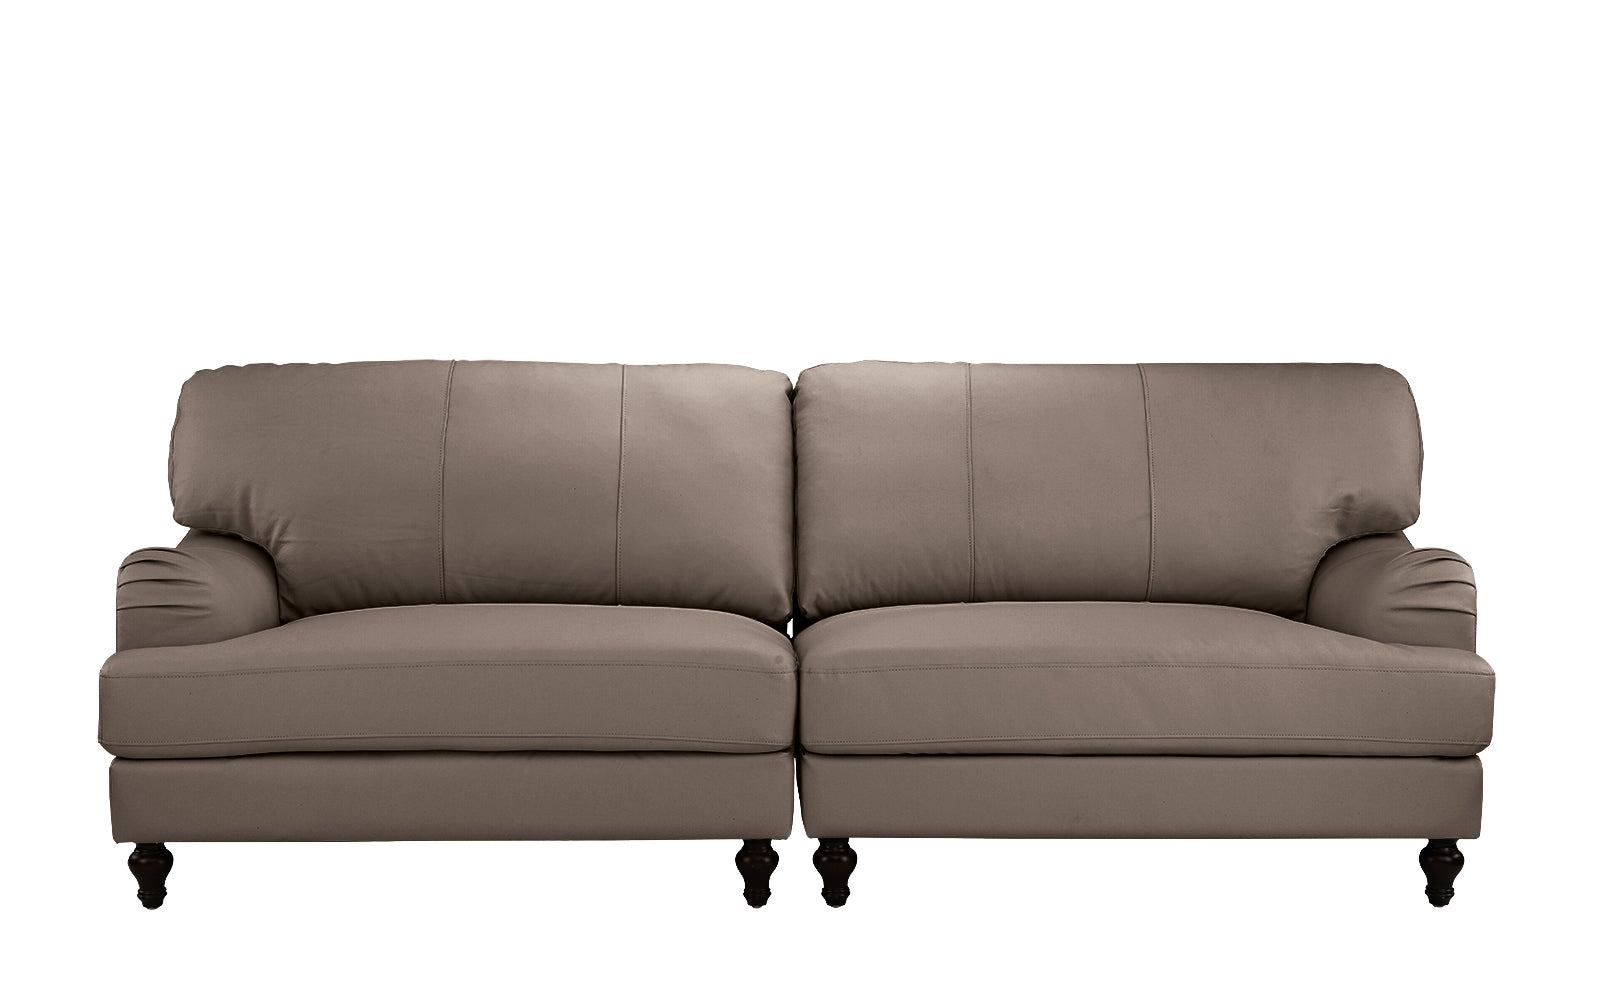 Evelyn Classic Convertible Leather Match Sofa